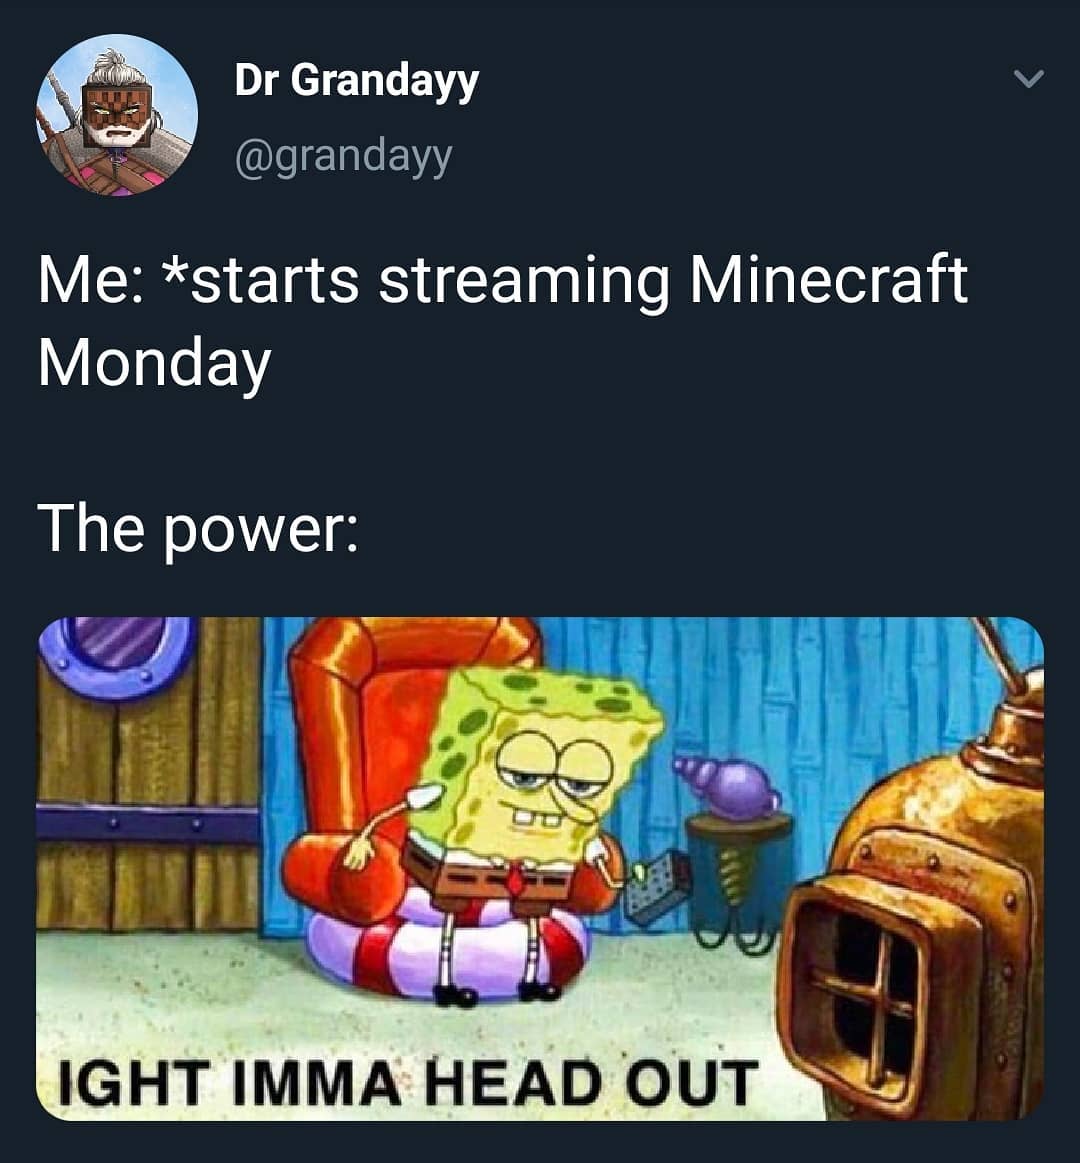 ight ima head out - ight imma head out - Dr Grandayy Me starts streaming Minecraft Monday The power ce Ight Imma Head Out